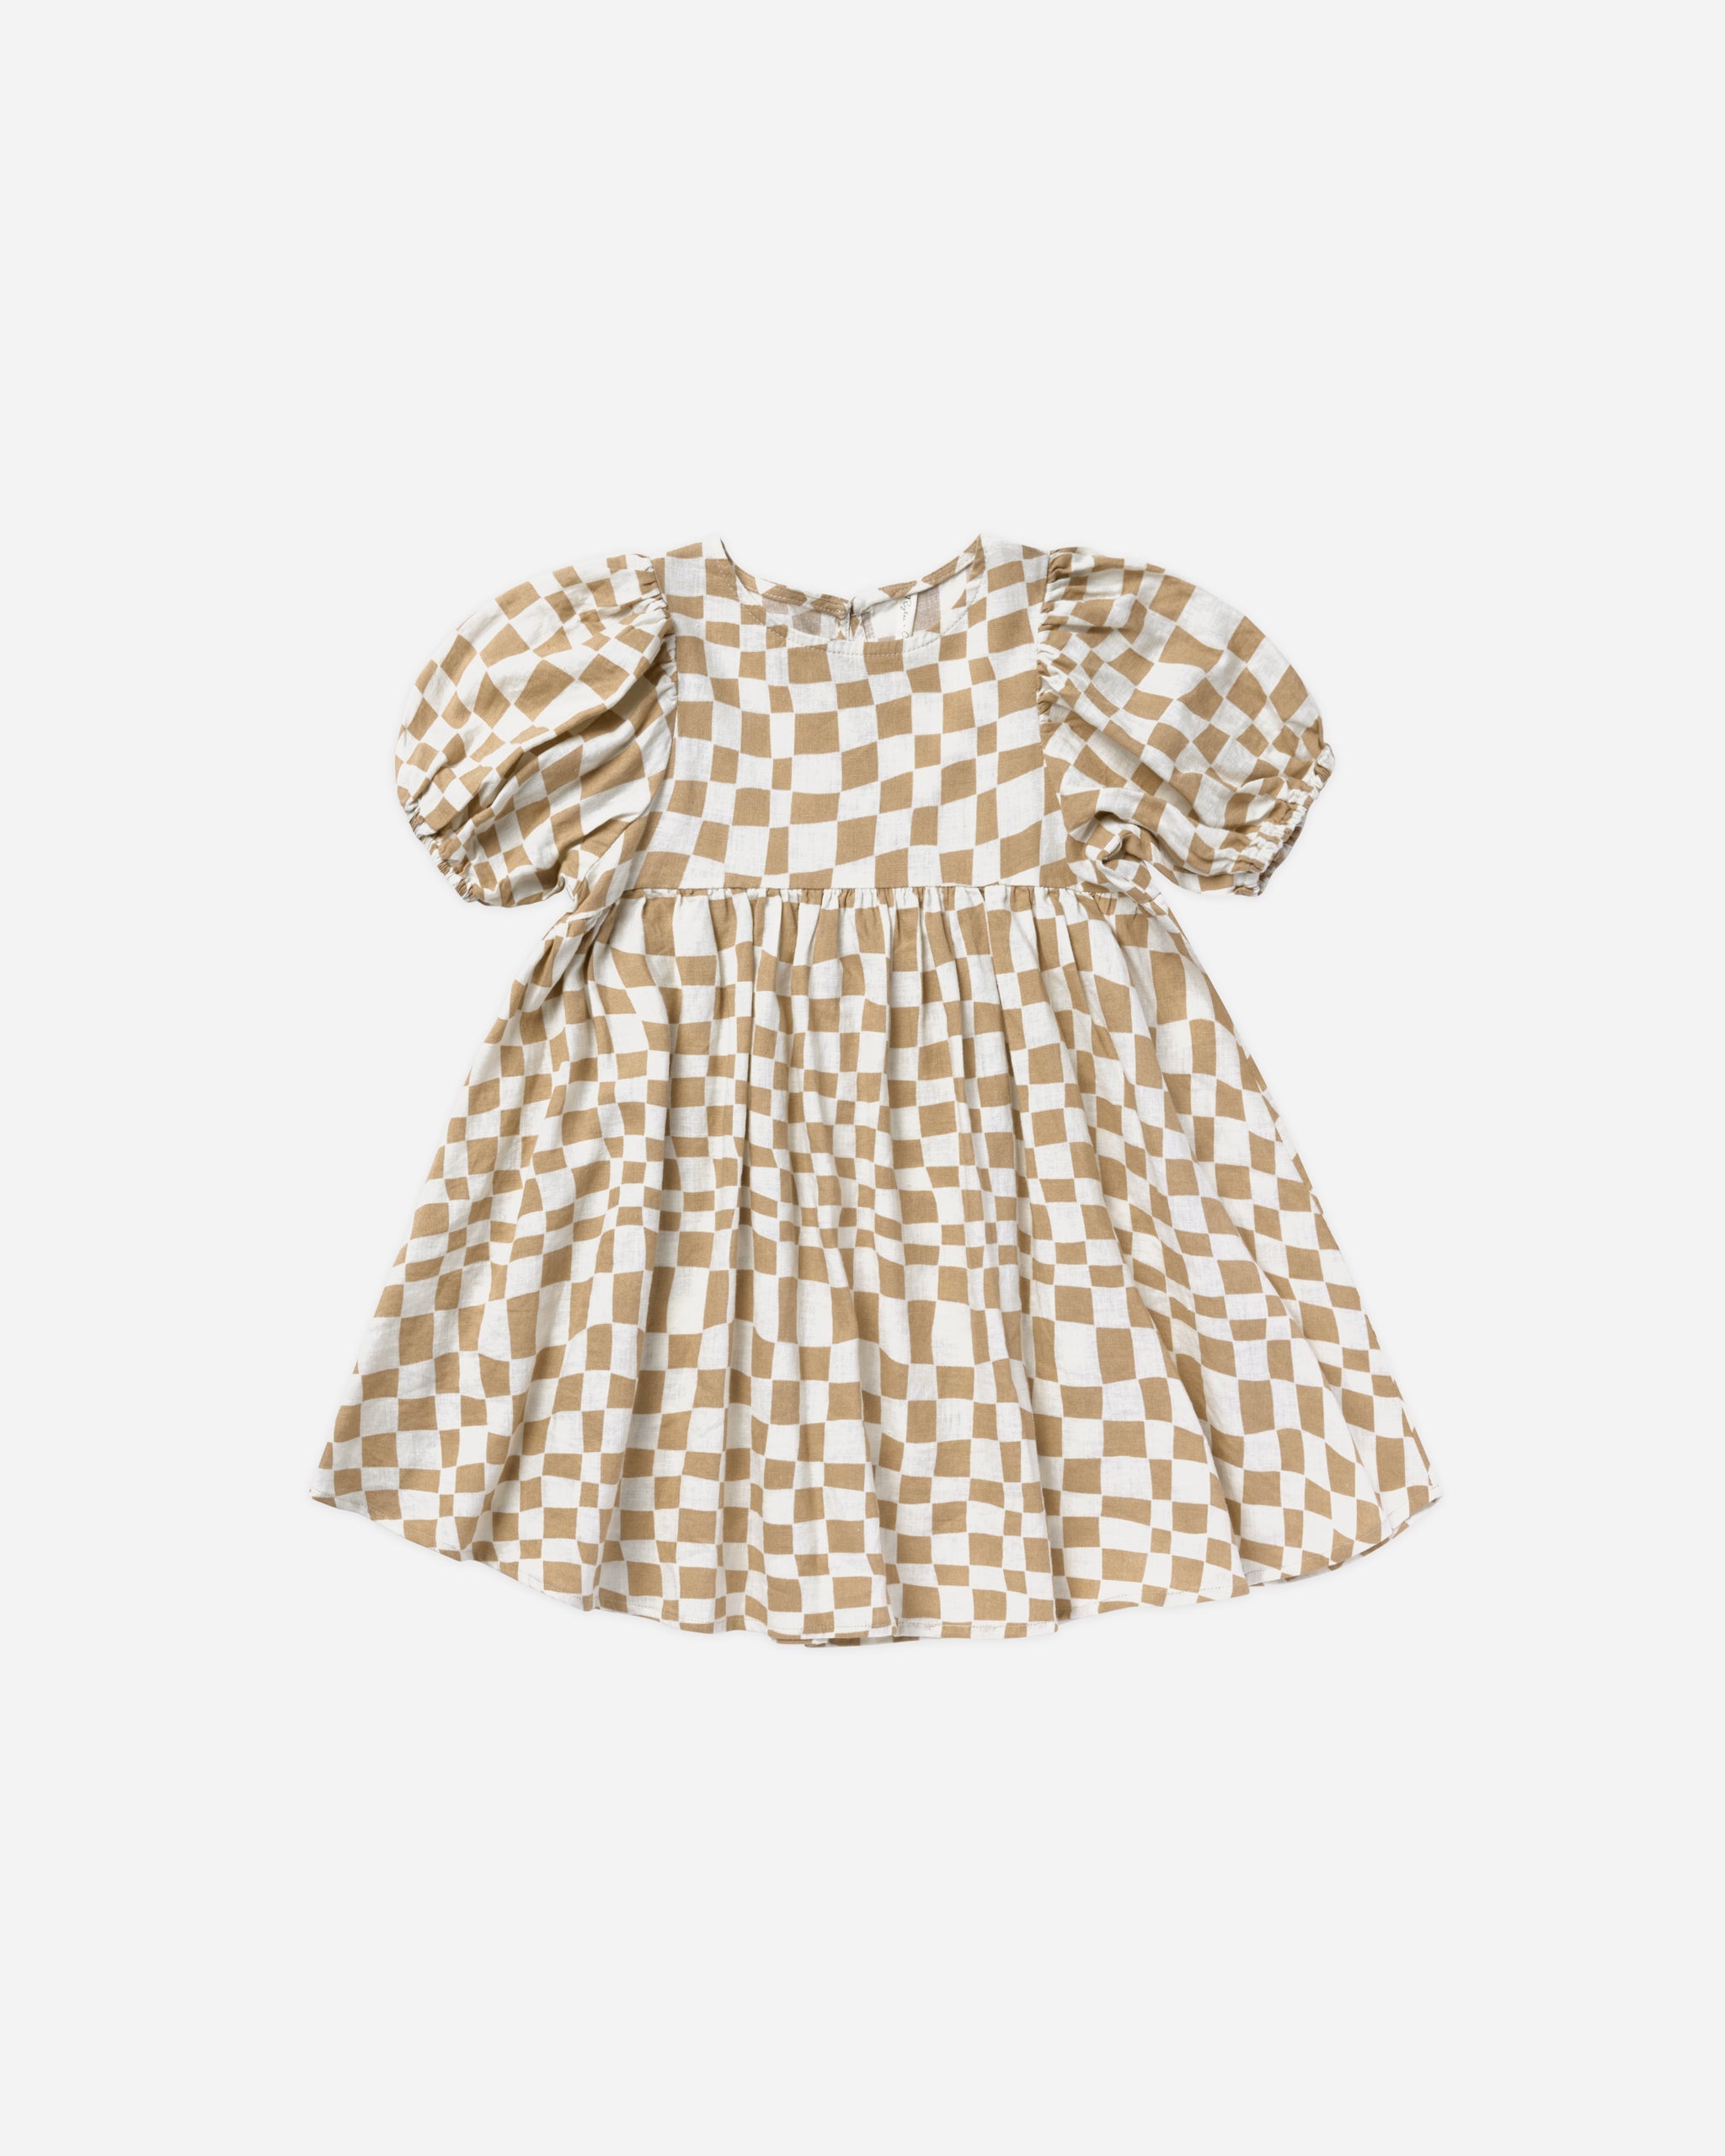 Marley Dress || Sand Checker - Rylee + Cru | Kids Clothes | Trendy Baby Clothes | Modern Infant Outfits |